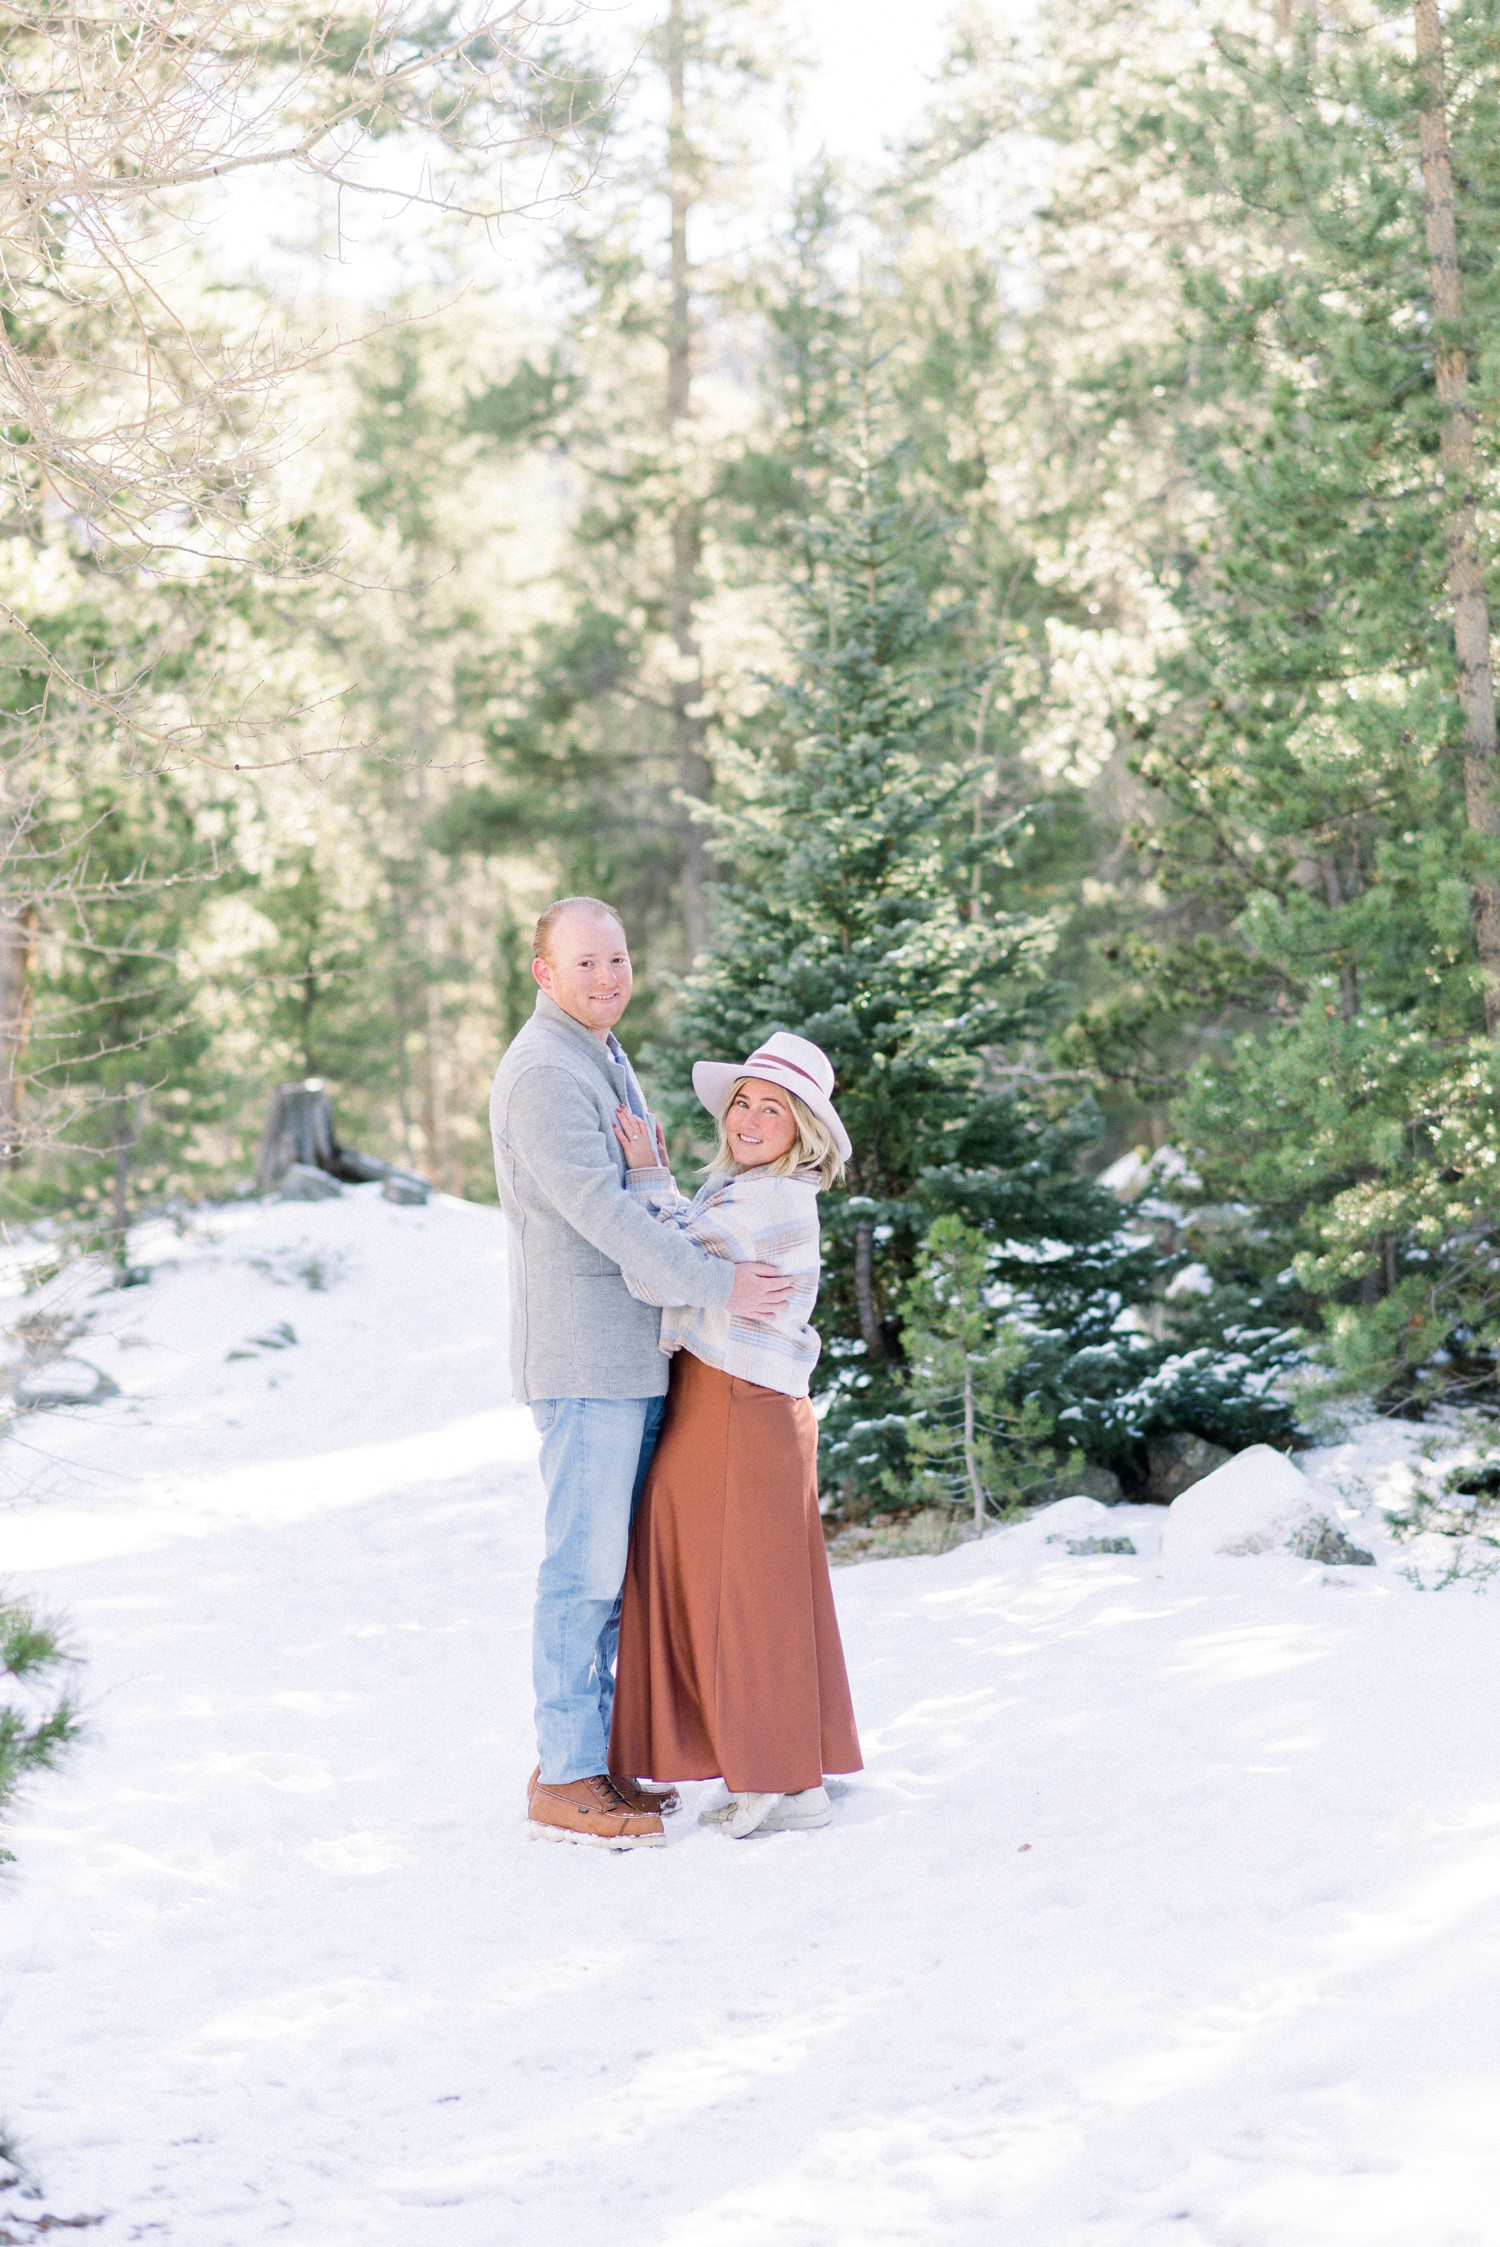 Colorado Engagement photos at Officer's Gulch near Vail.